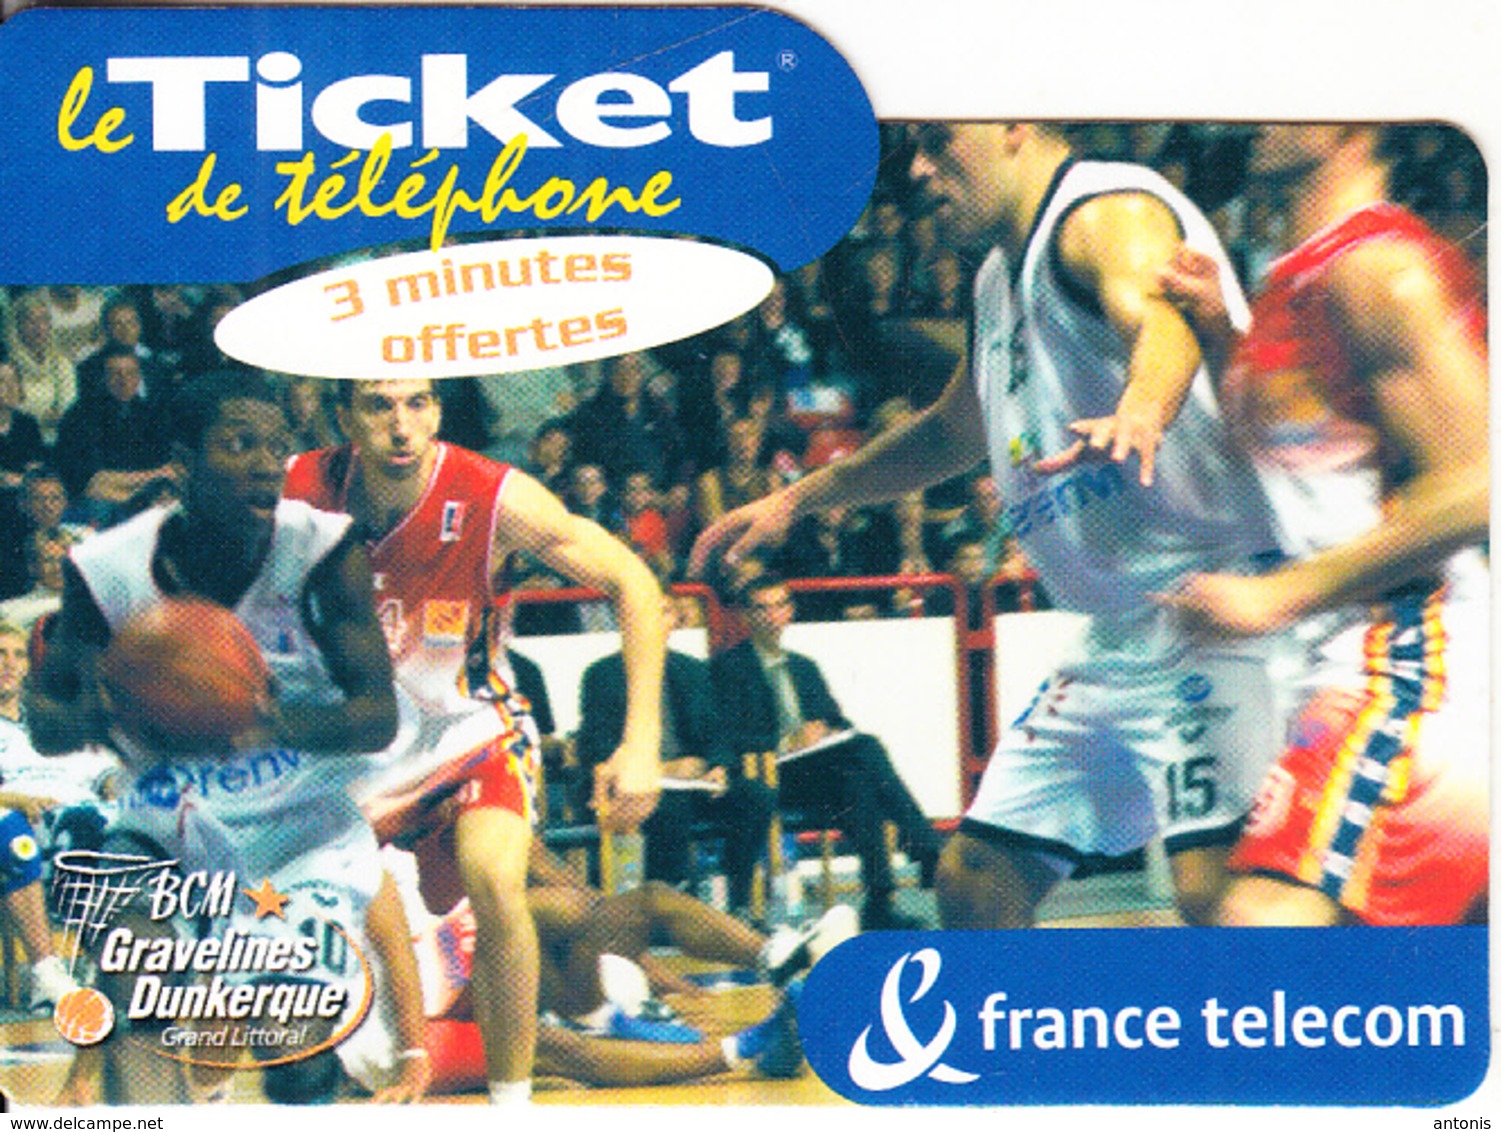 FRANCE - Basketball, BCM/Gravelines Dunkerque, FT Promotion Prepaid Card, Tirage 2500, Exp.date 20/12/03, Mint - Biglietti FT